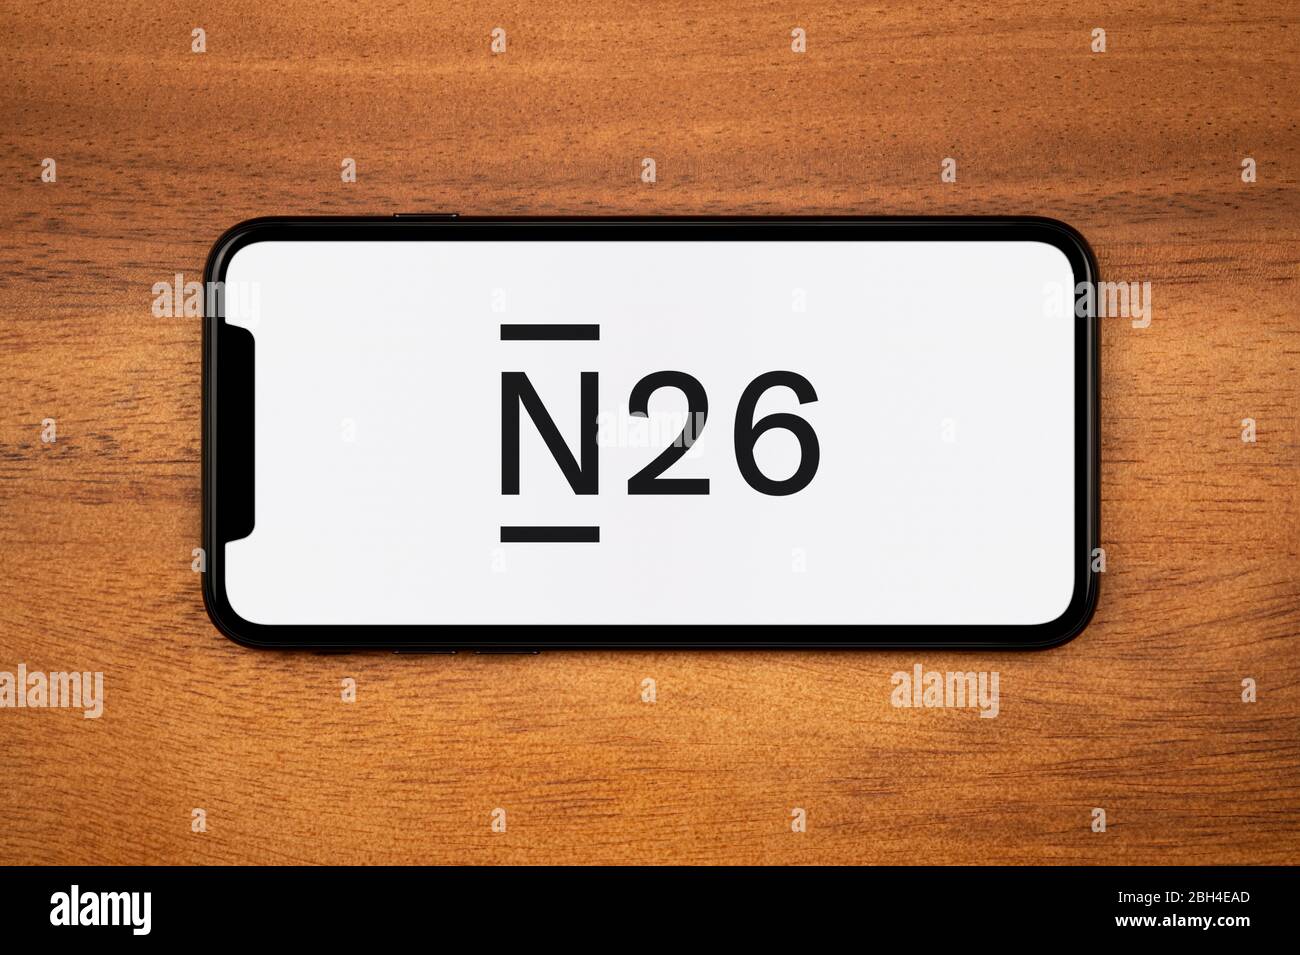 A smartphone showing the N26 logo rests on a plain wooden table (Editorial use only). Stock Photo